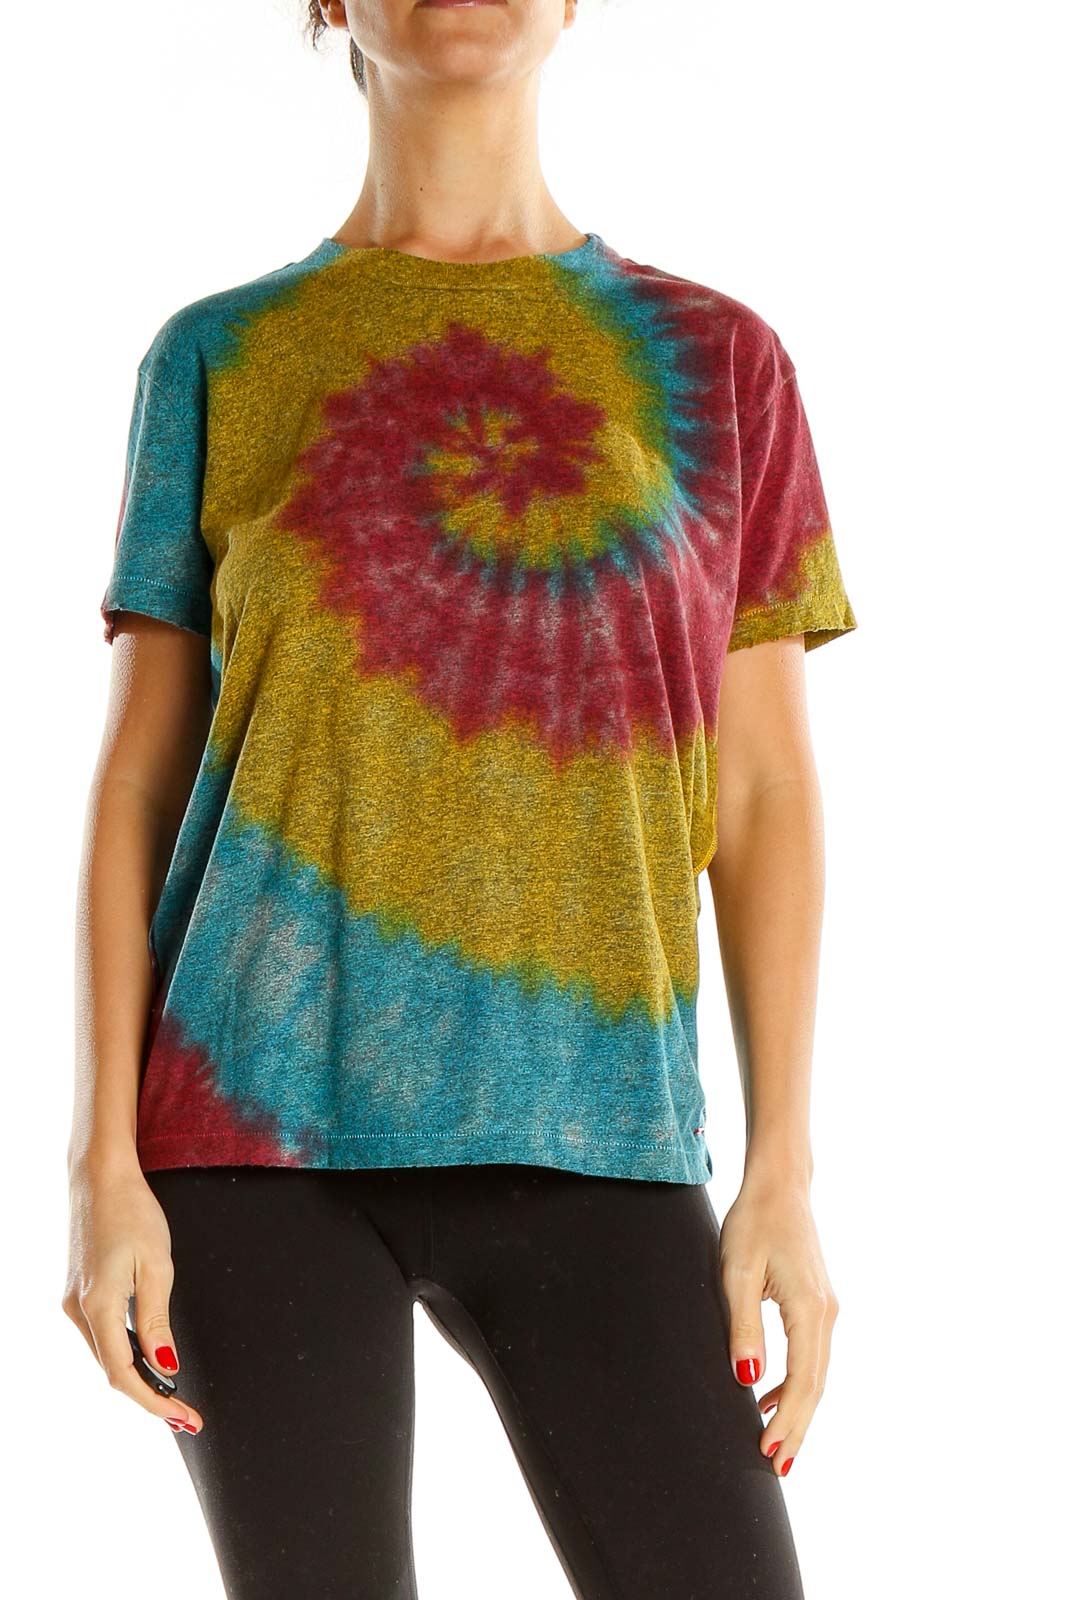 Rainbow Tie And Dye T-Shirt Front